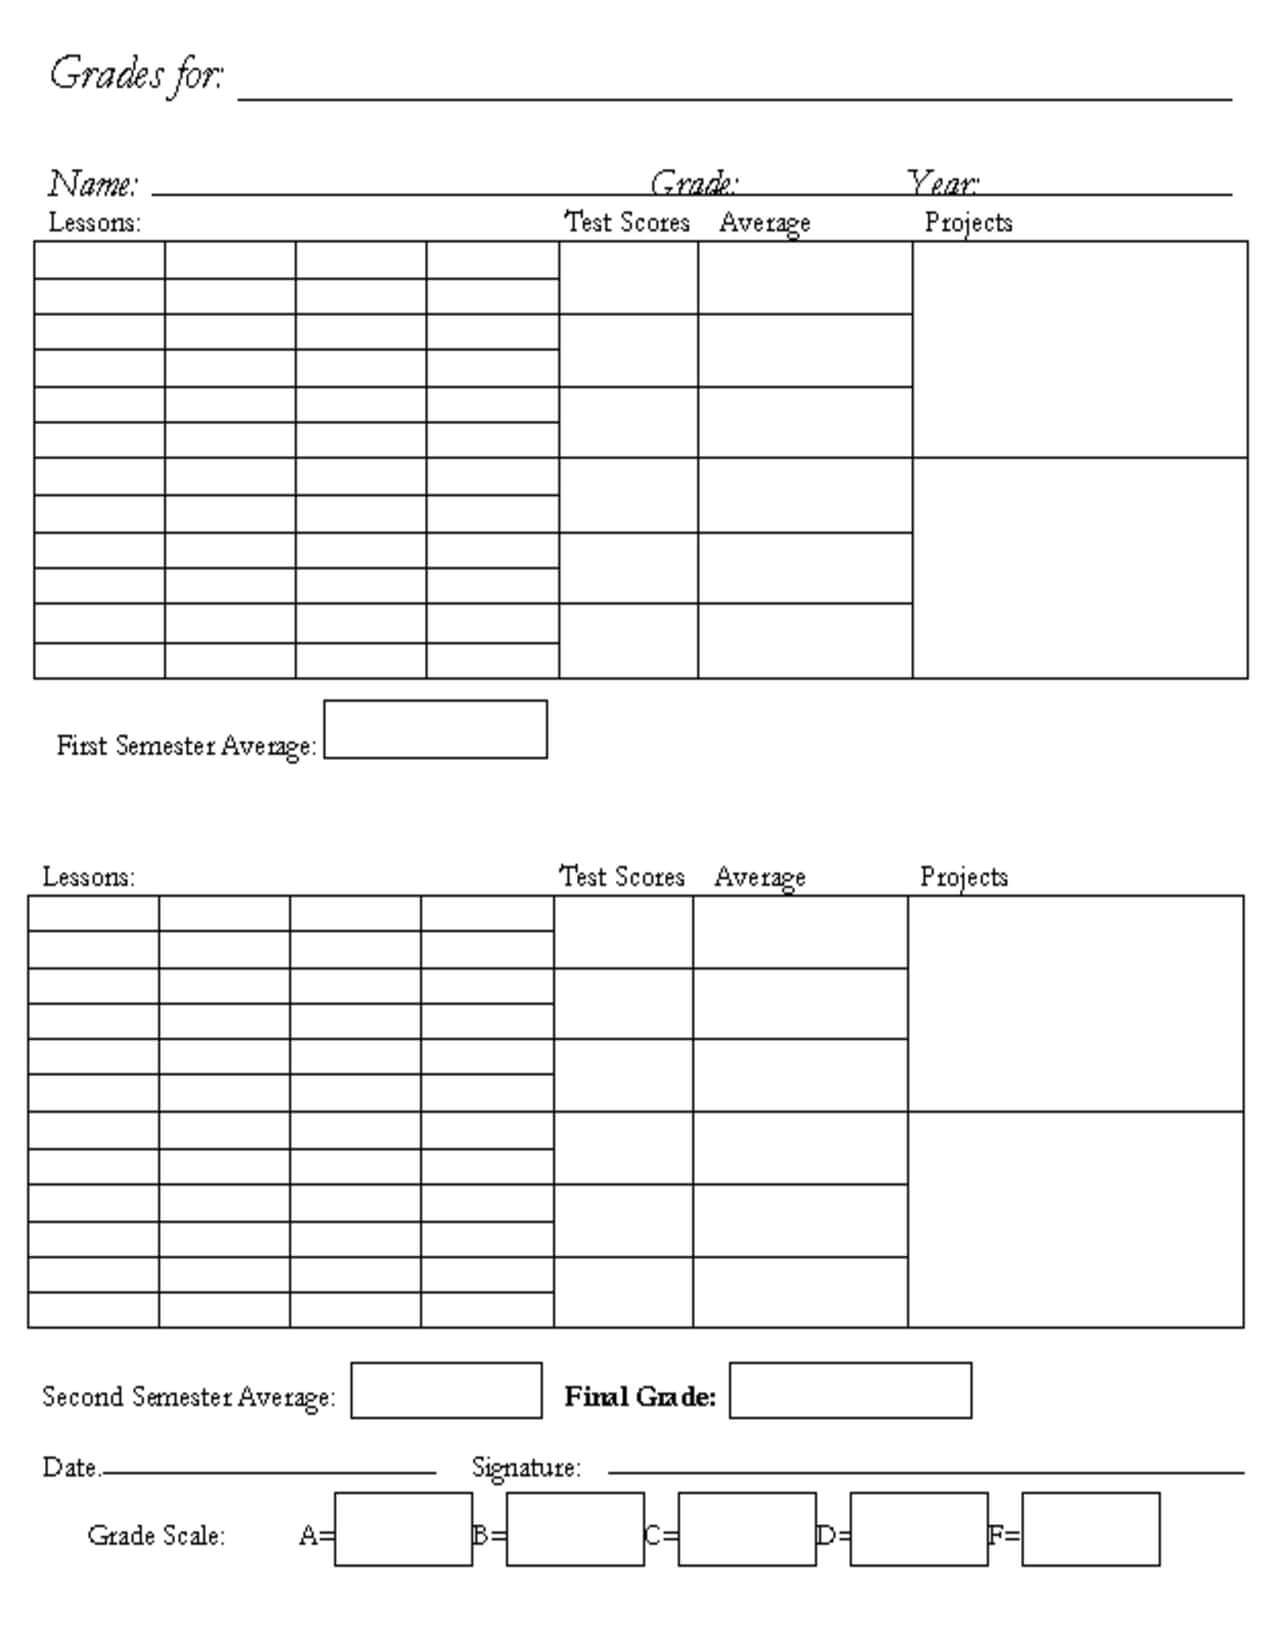 002 Free Report Card Template Surprising Ideas For With Homeschool Report Card Template